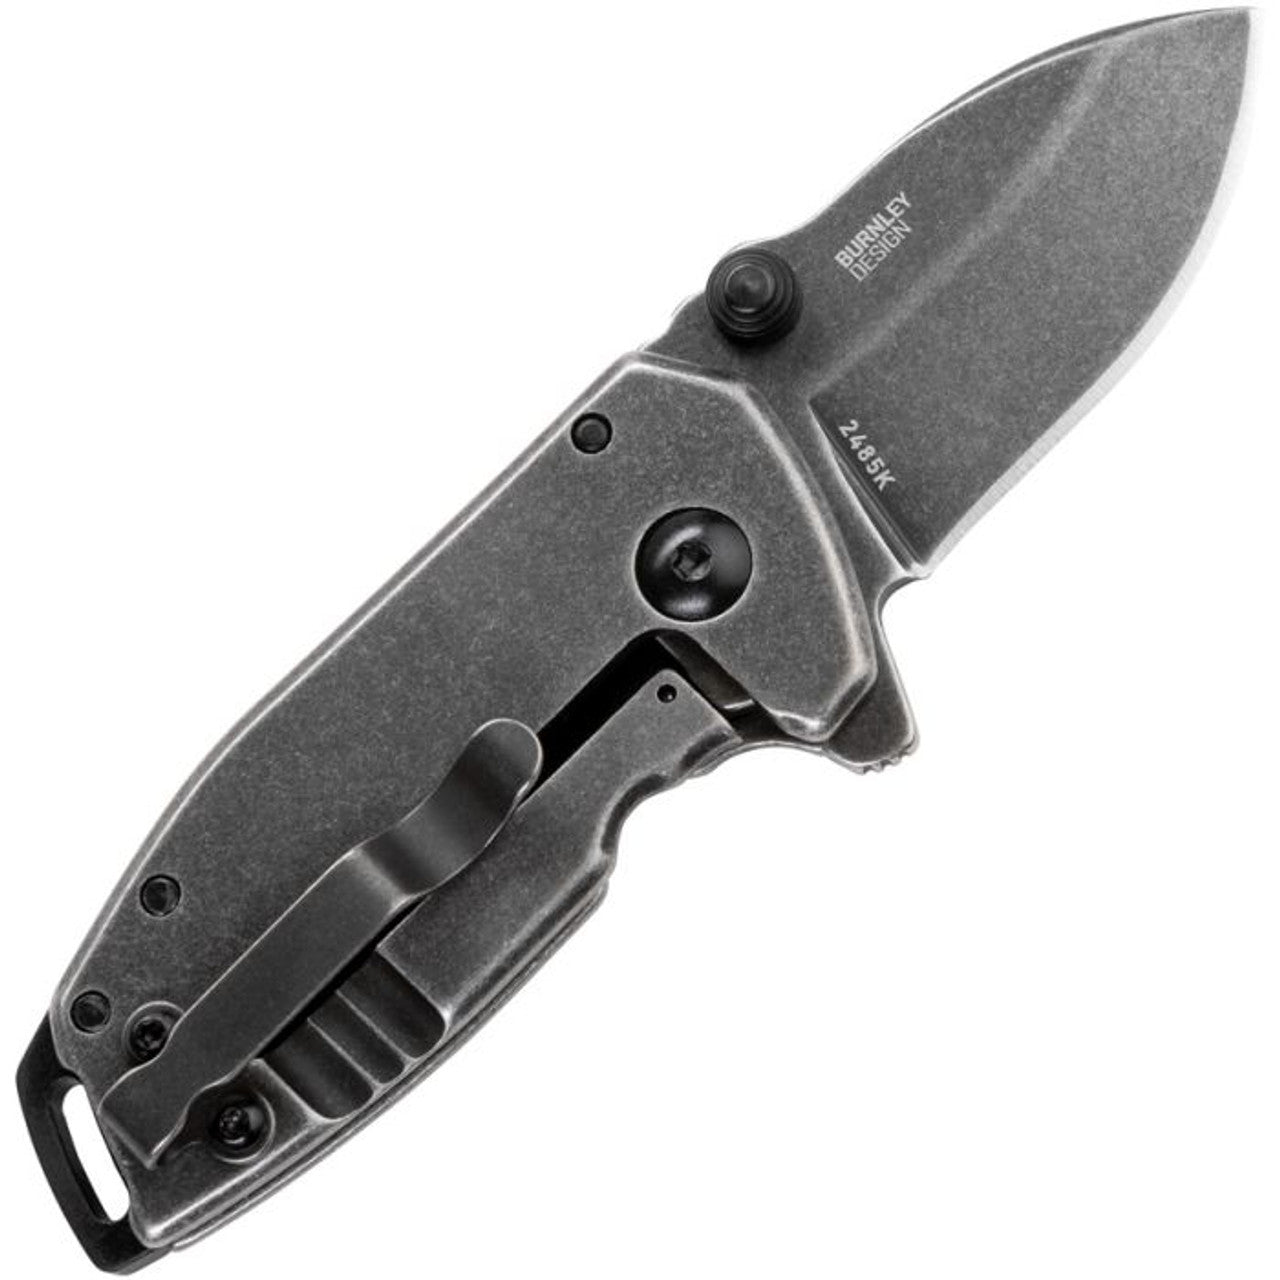 Squid™ Compact pocket knife